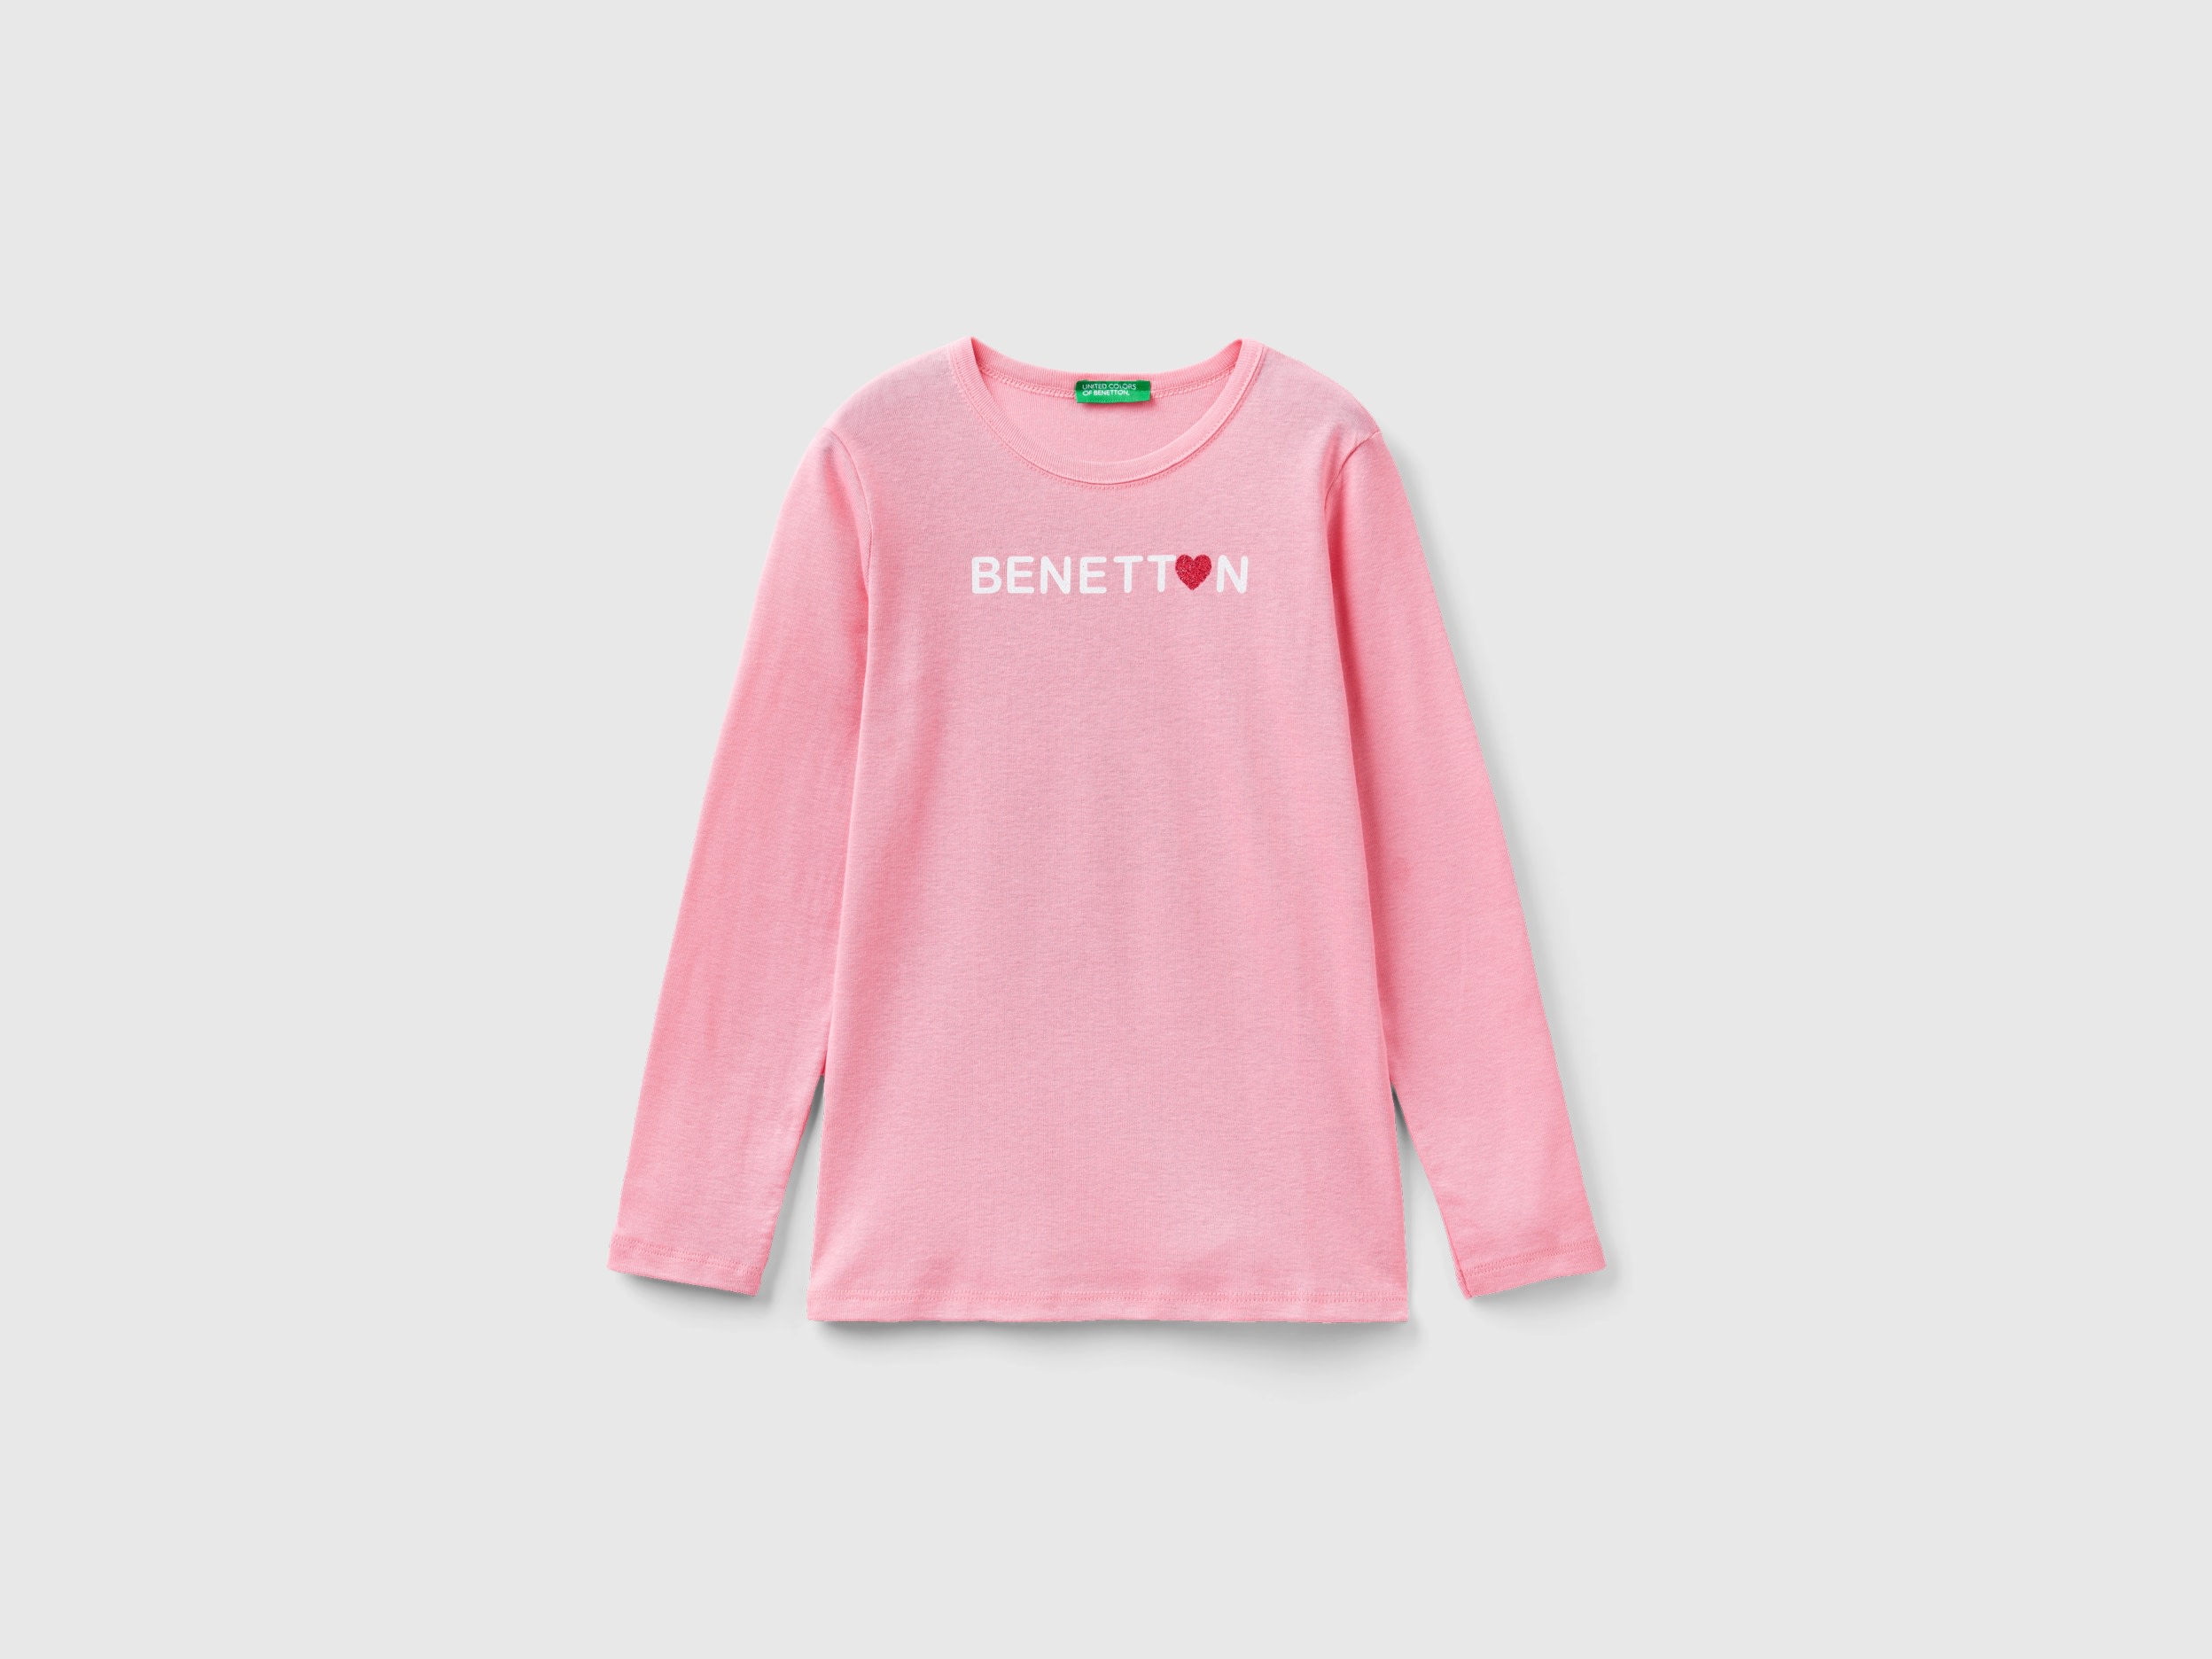 Image of Benetton, Long Sleeve T-shirt With Glitter Print, size 2XL, Pink, Kids